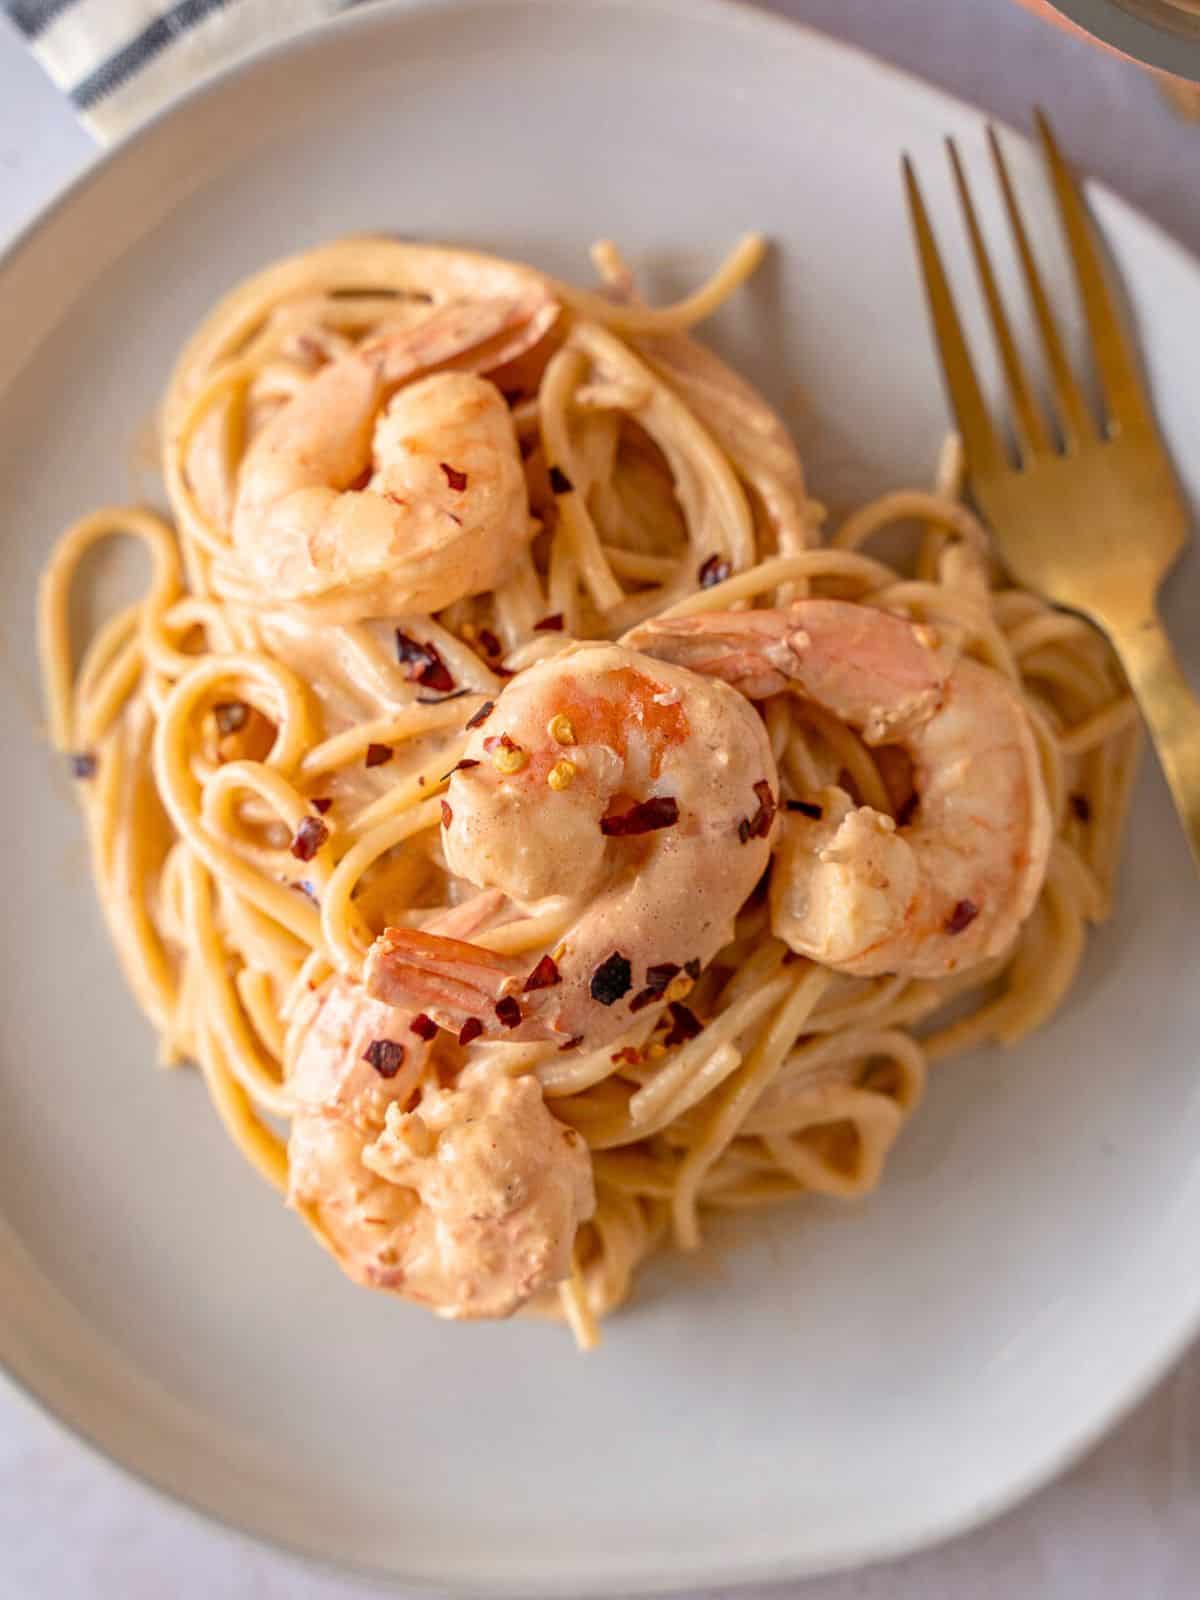 Spicy Chipotle pasta topped with shrimp on a plate with a gold fork.